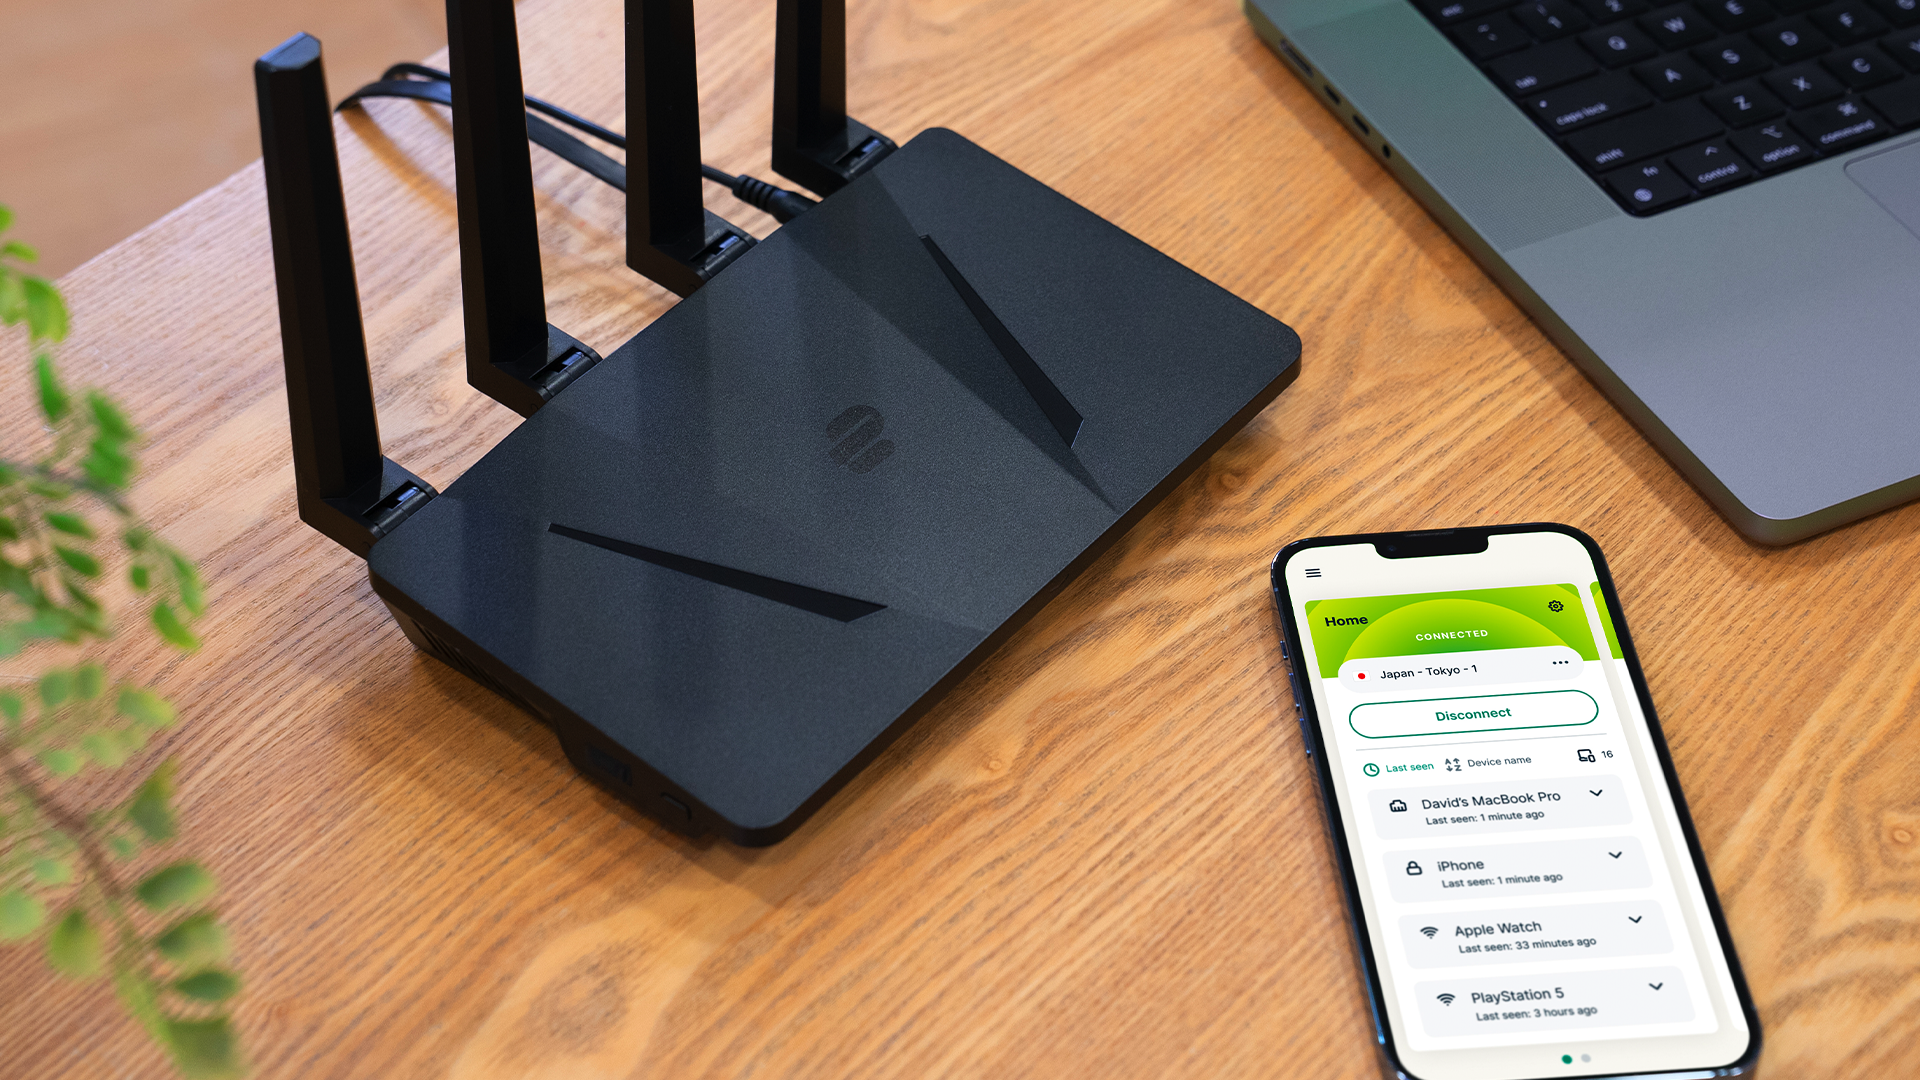 ExpressVPN’s Aircove Router Adds a VPN to Your Home Network